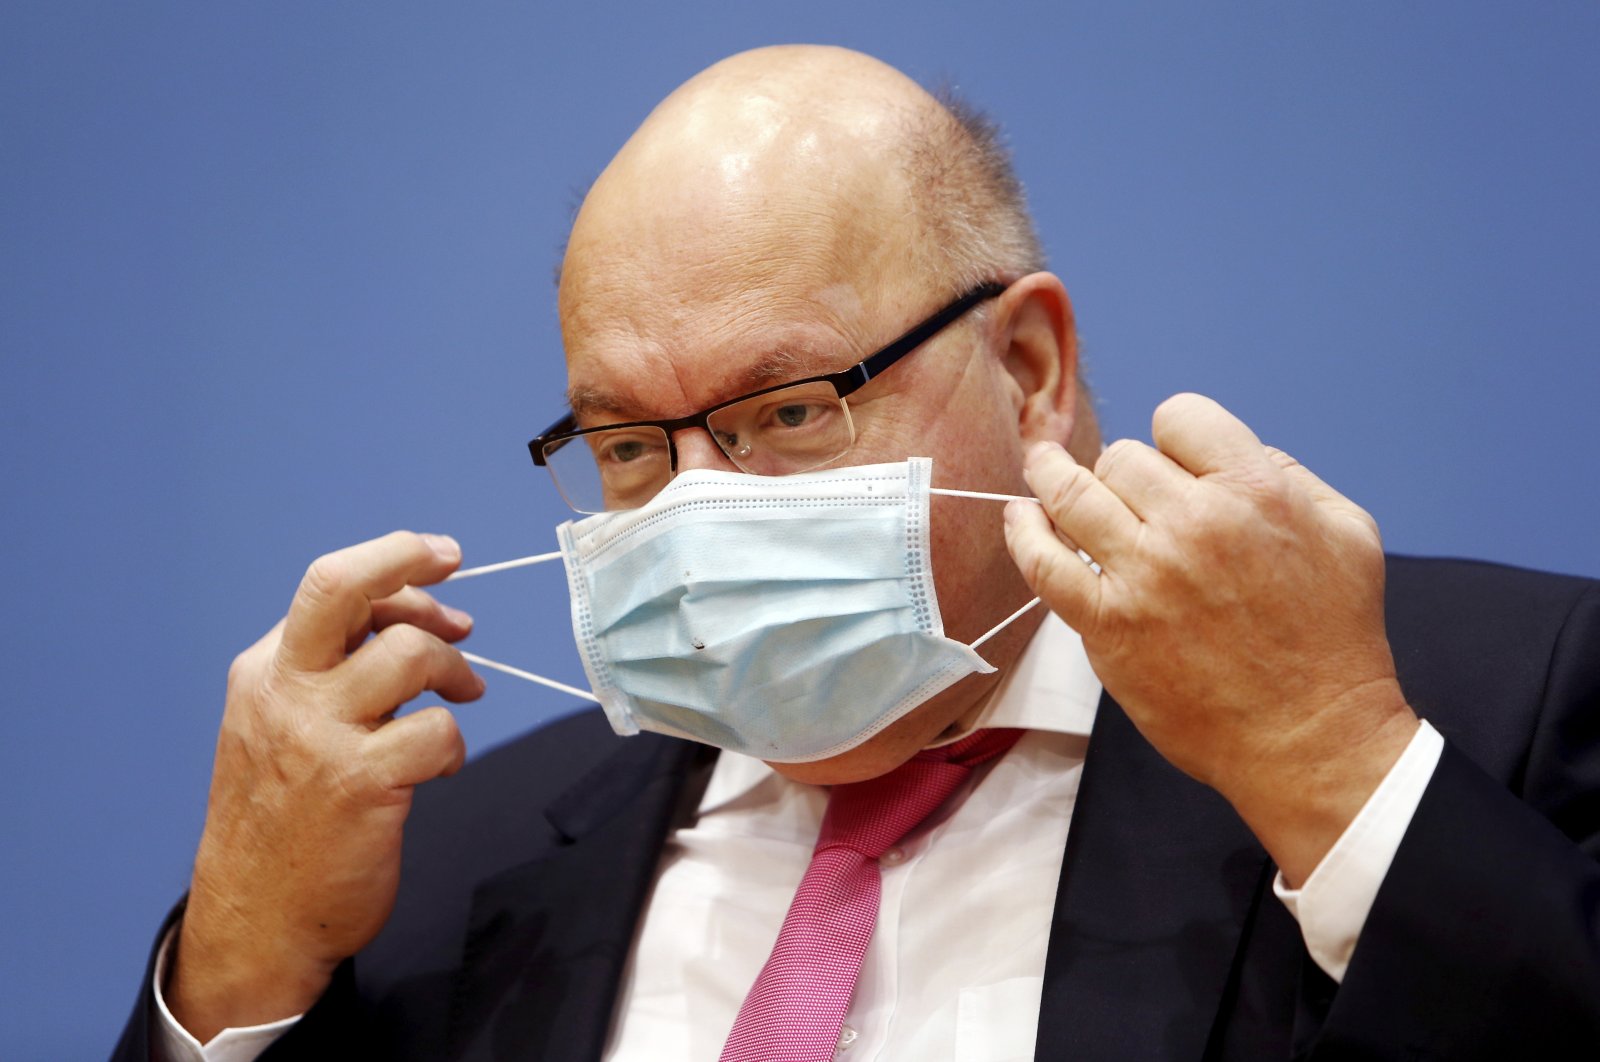 German Economy Minister Peter Altmaier takes off his mask as he arrives at a news conference to present the federal government's autumn economic forecast in Berlin, Germany, Oct. 30, 2020. (AP Photo)